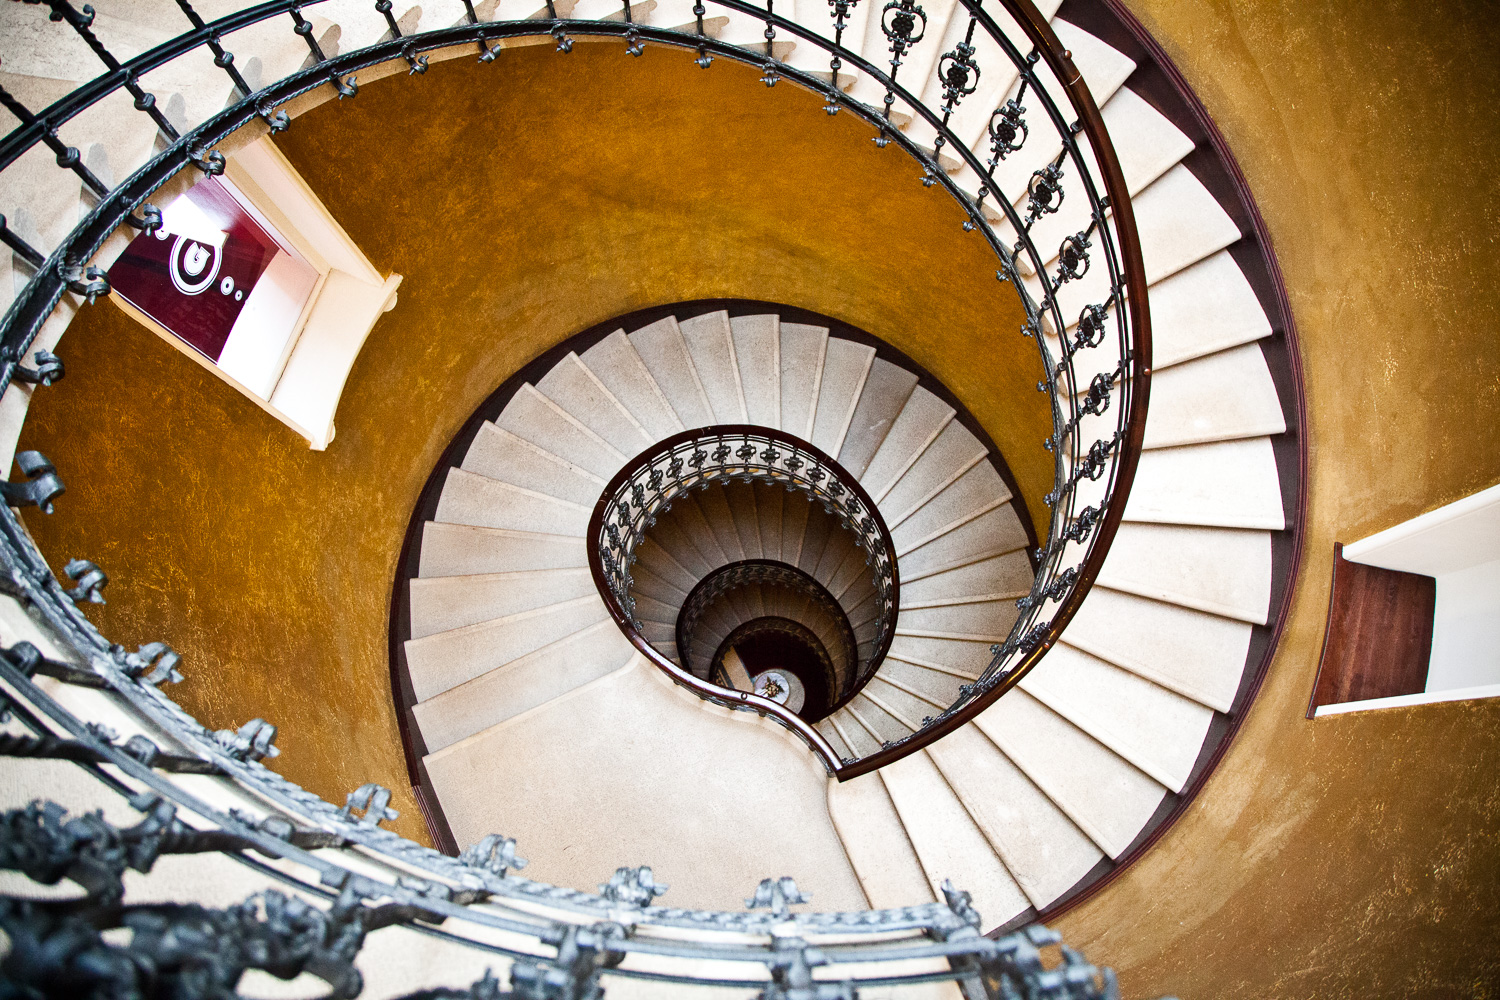 Spiral Staircase at Gerlóczy Hotel in Budapest, Hungary